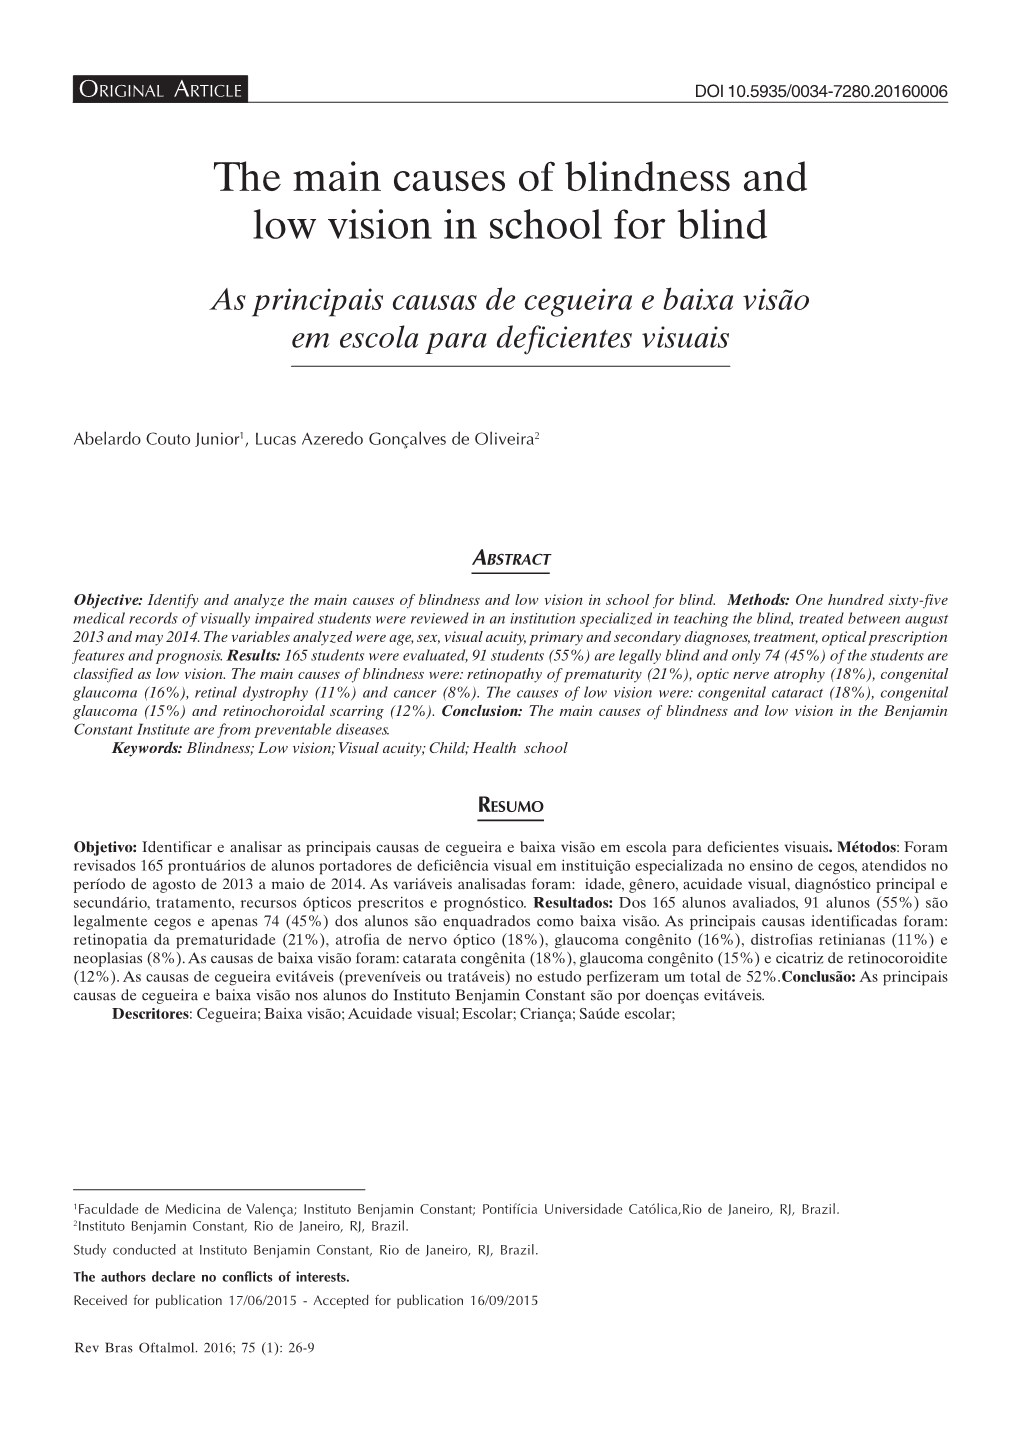 The Main Causes of Blindness and Low Vision in School for Blind